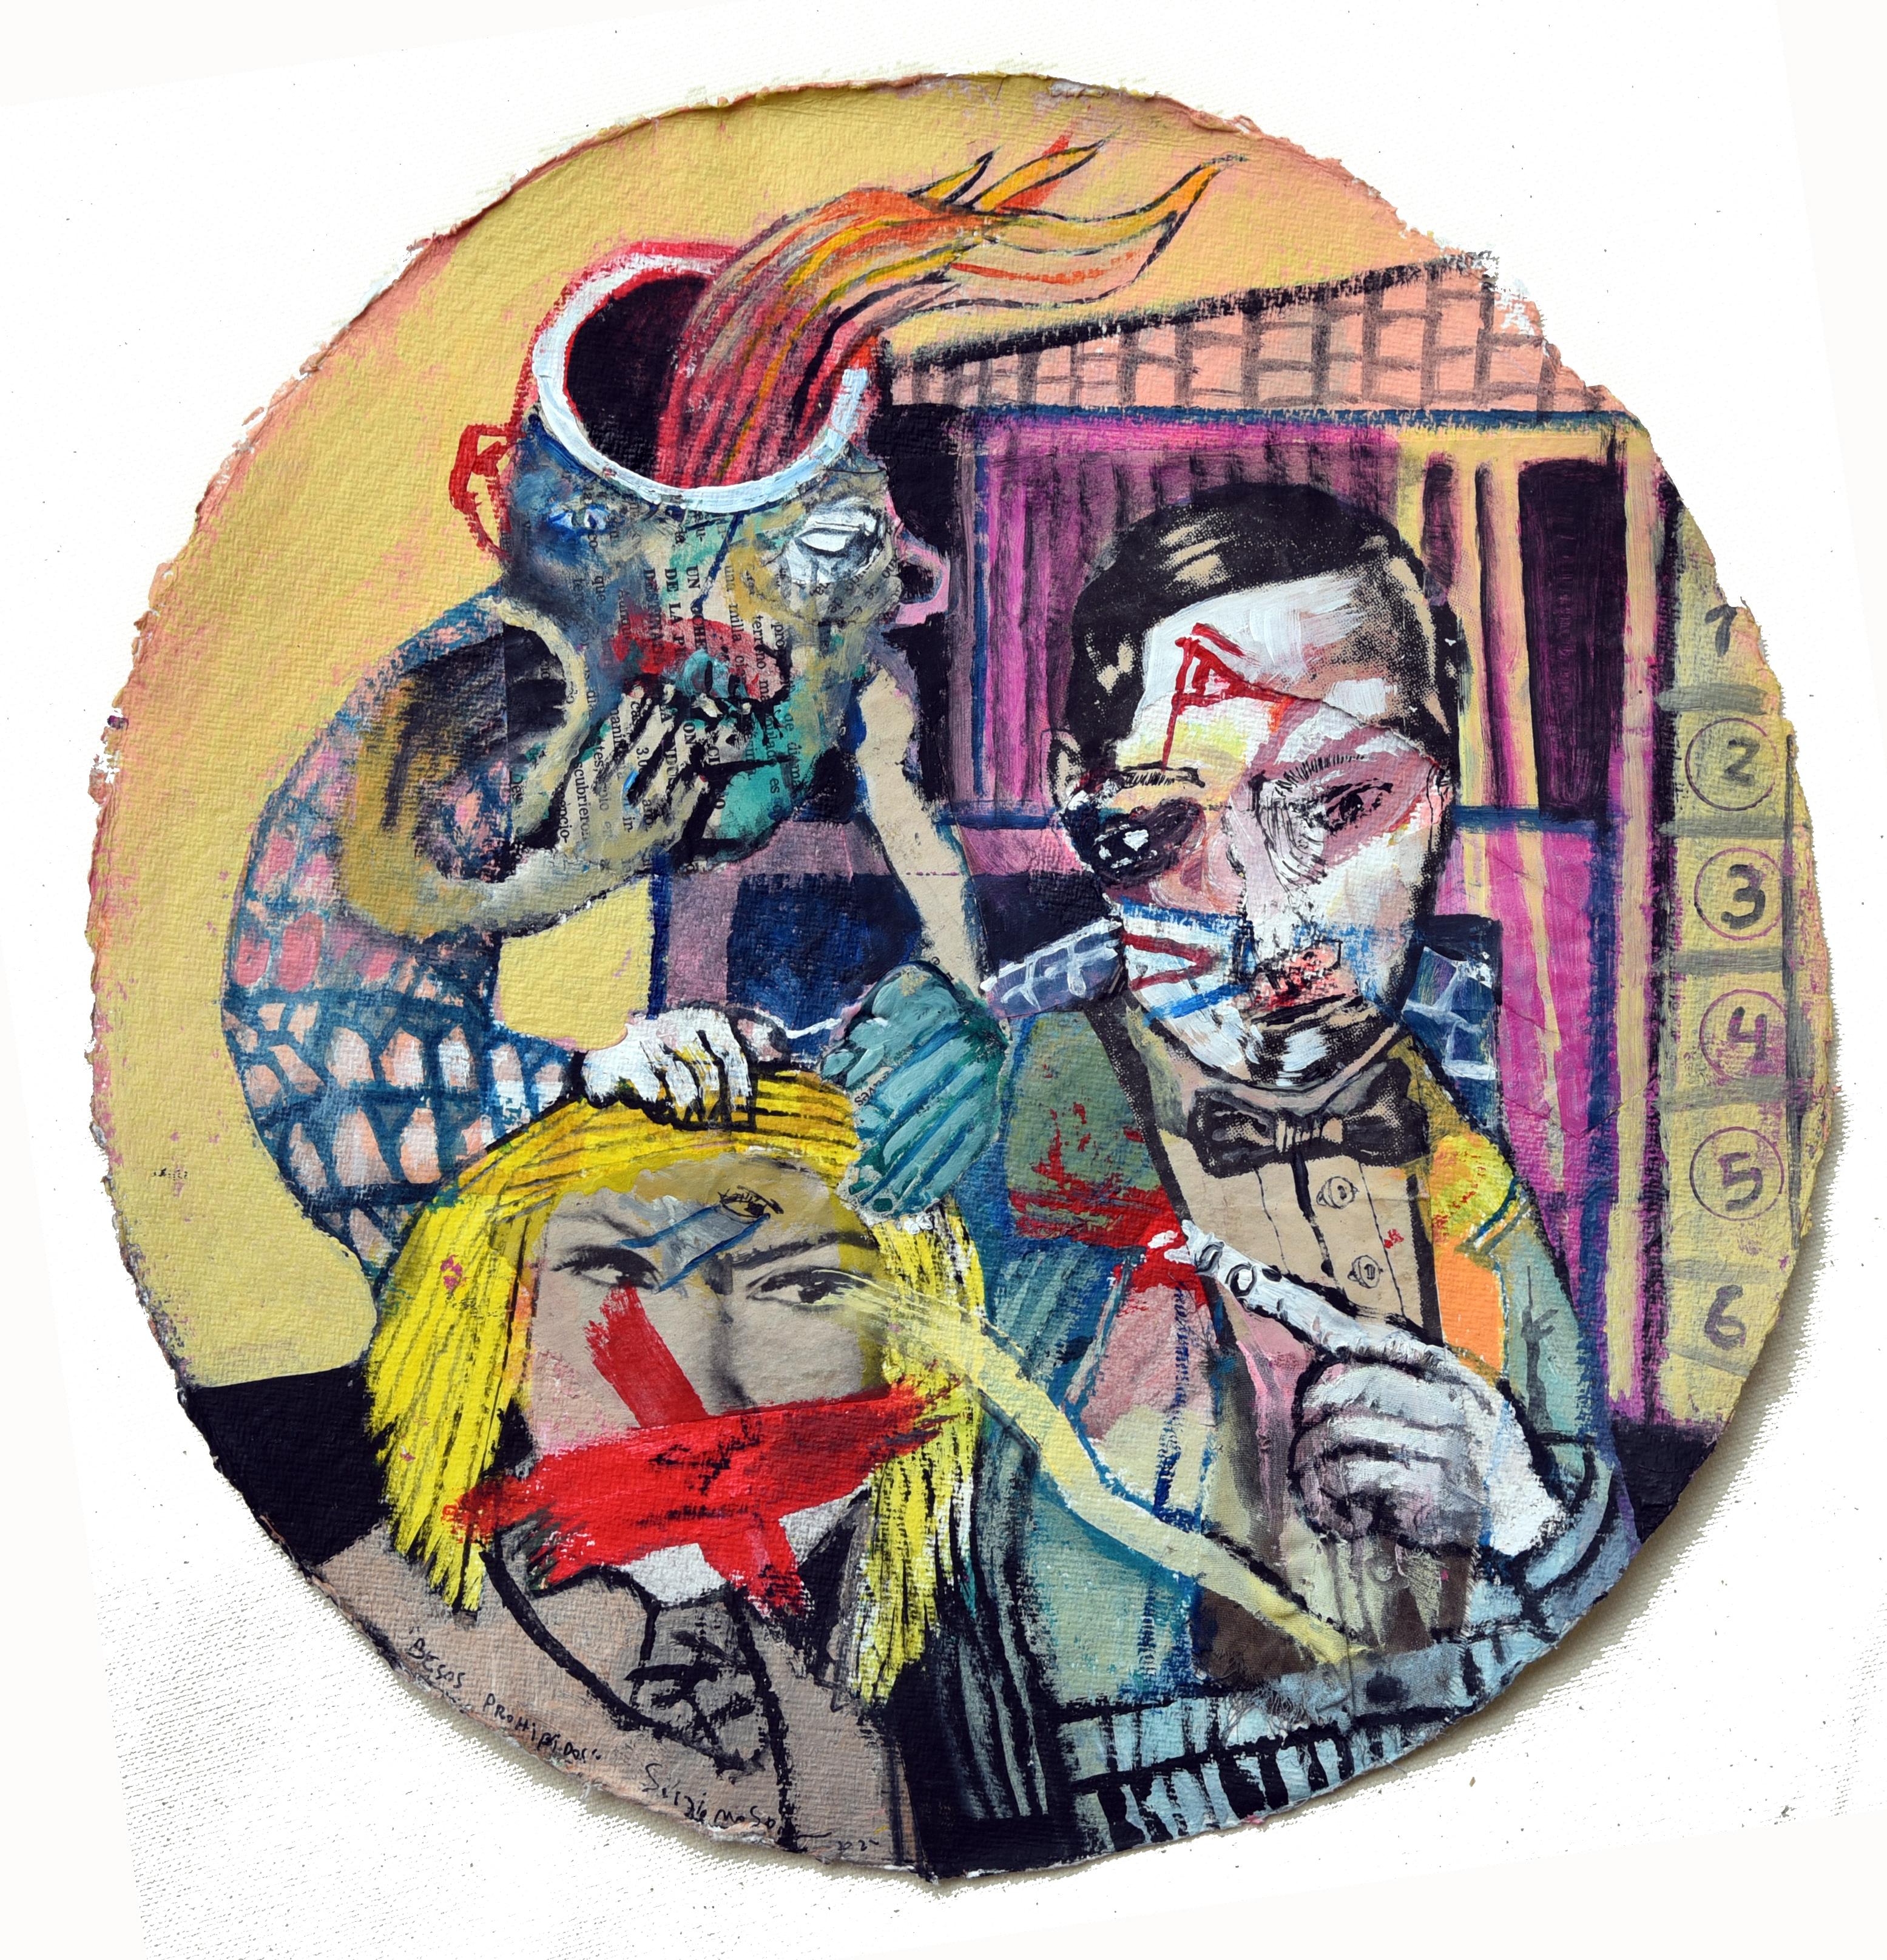 Acrylic paint and ink on paper
Tondo (diameter 30 cm)
Hand-signed and dated lower left by the artist